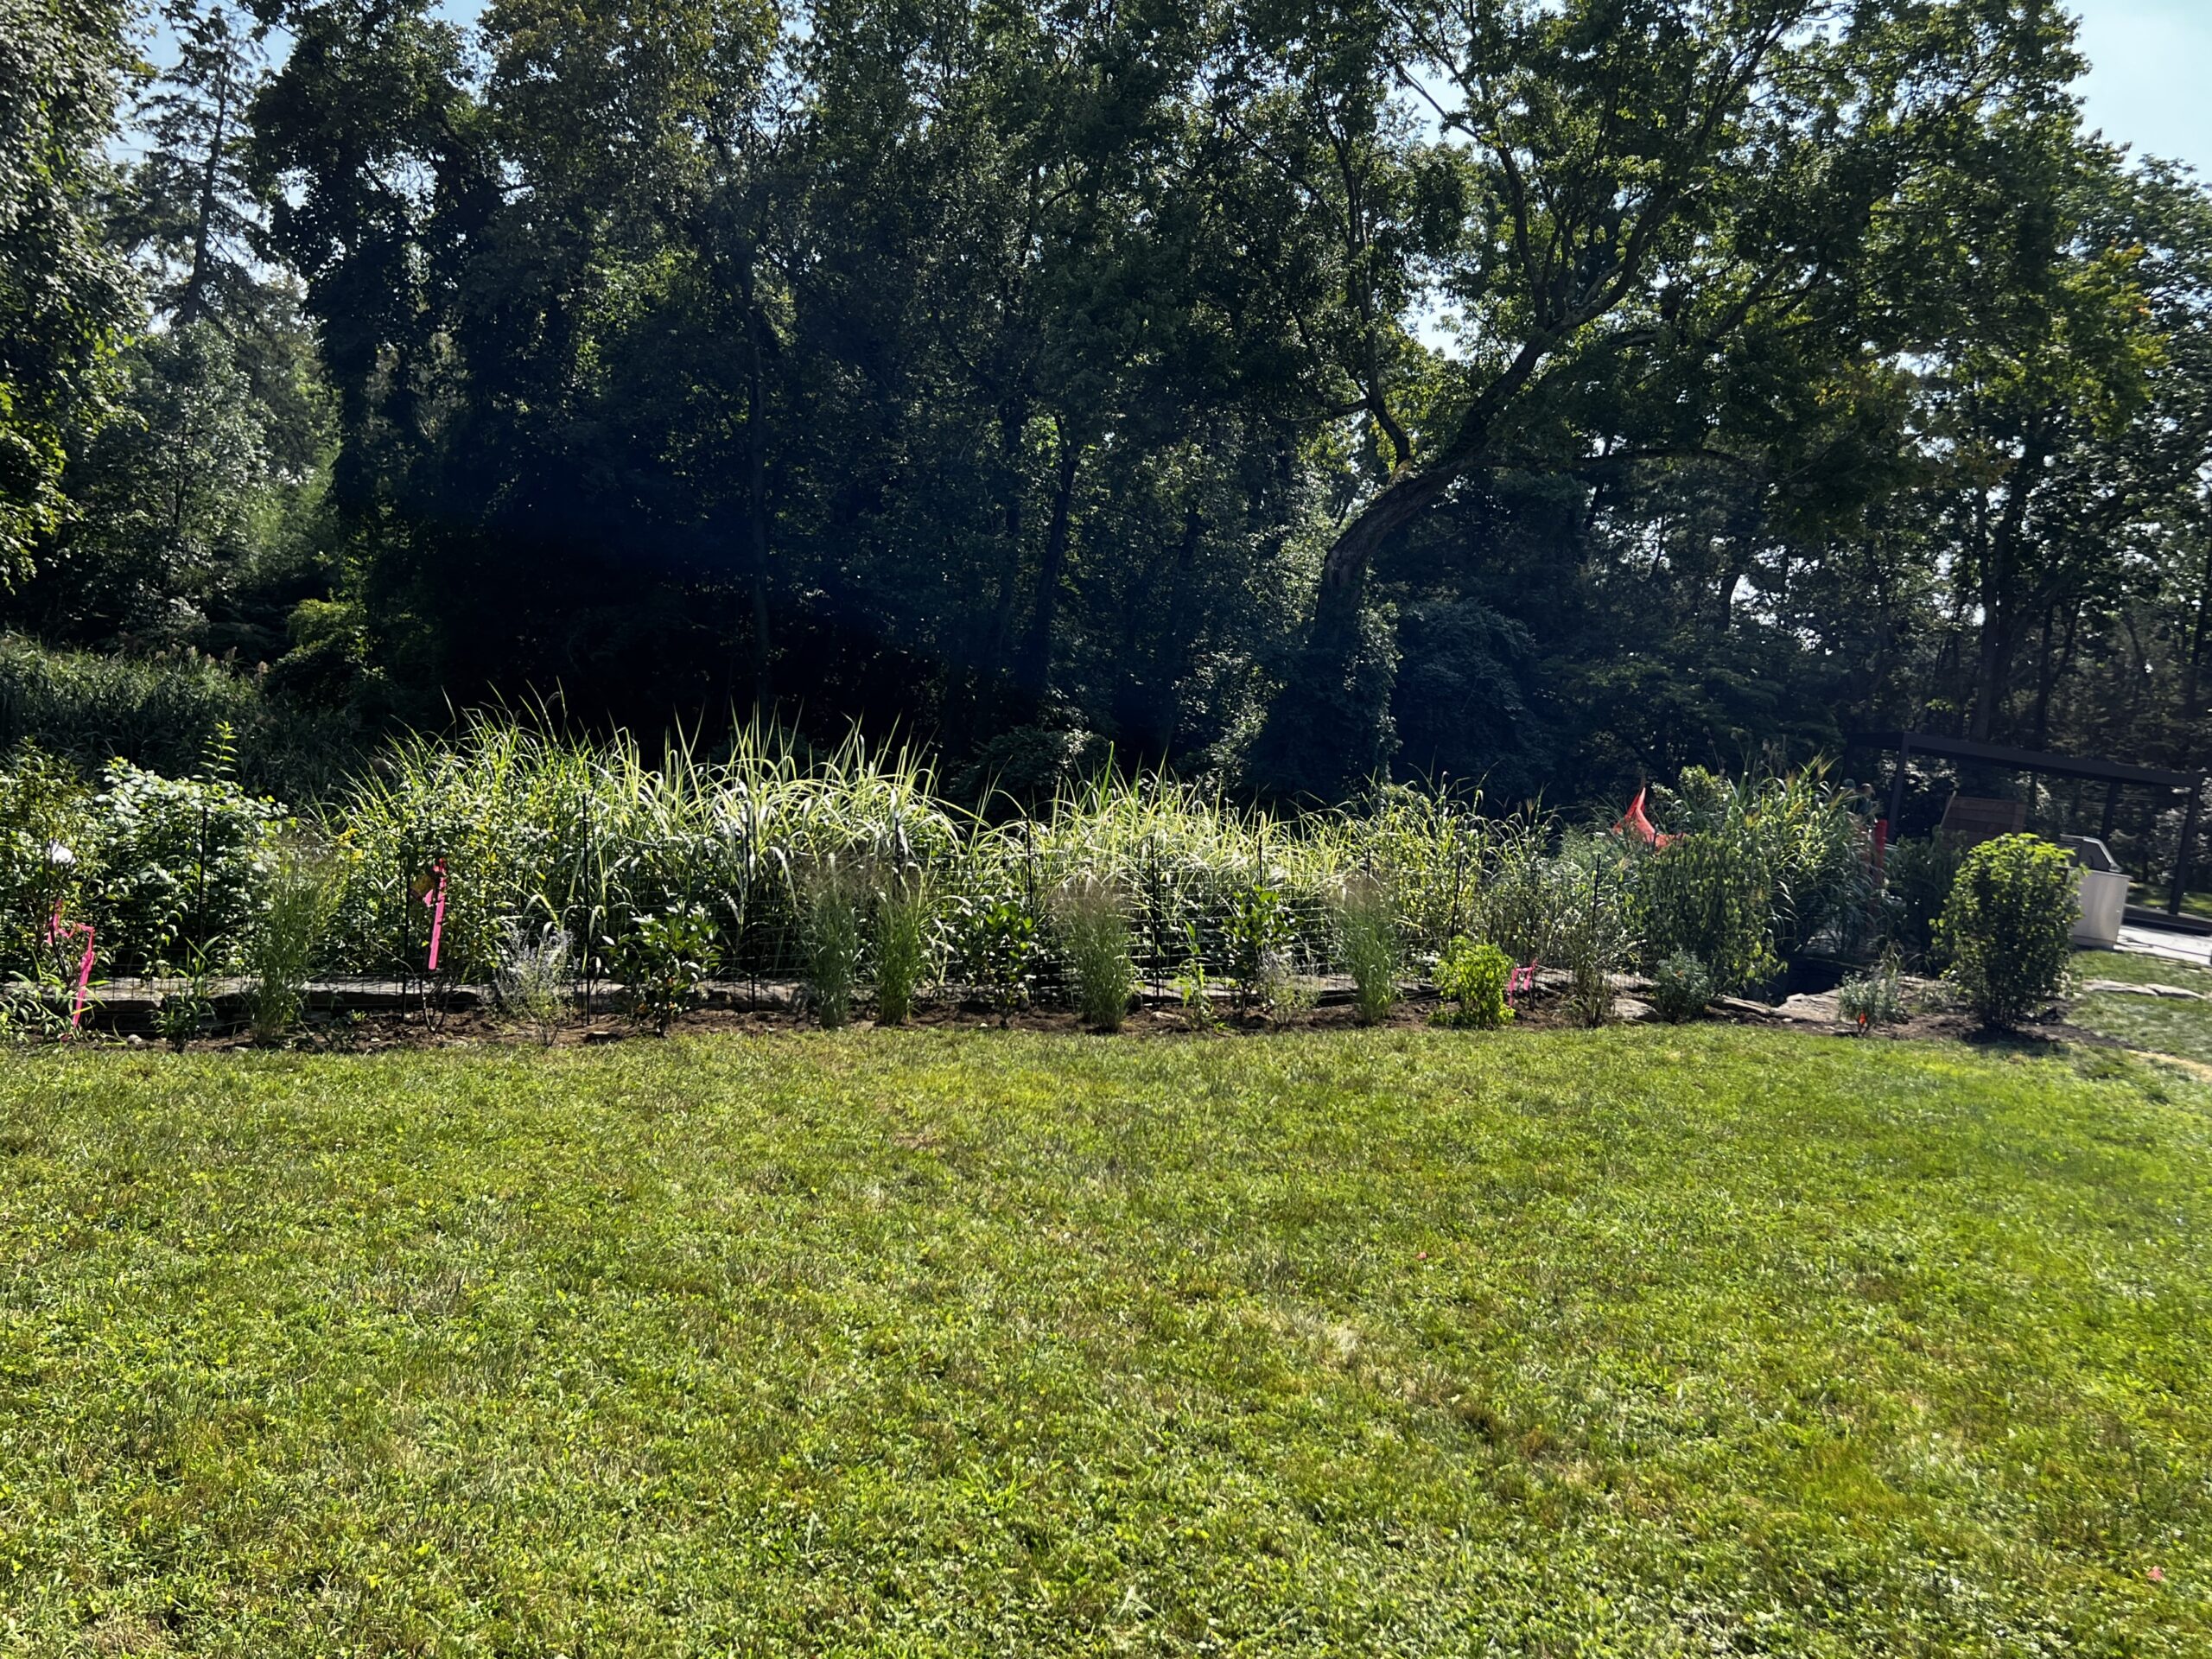 "Living Fence" vegetative border marks the edge of the retaining wall and start of the wetland.